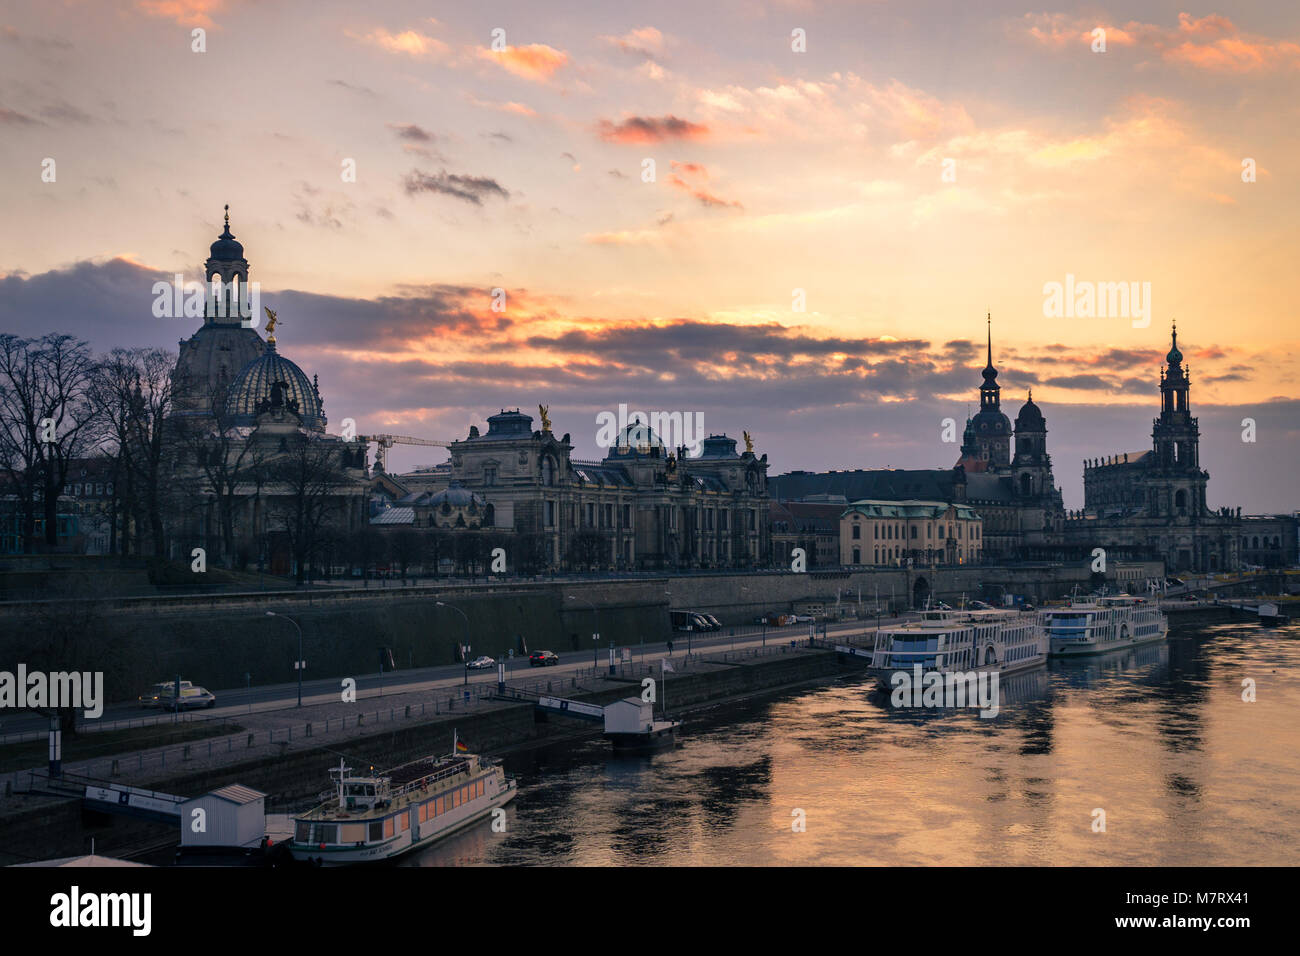 Dresden, Germany old town skyline on the Elbe River at sunset in the winter. Stock Photo